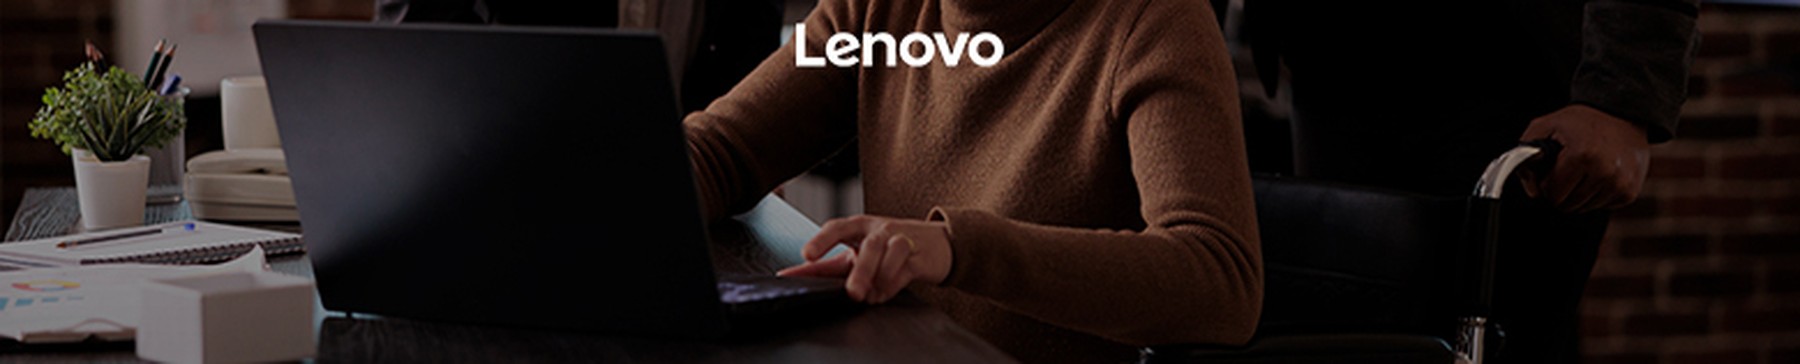 Save up to 40% on Lenovo PCs and Laptops